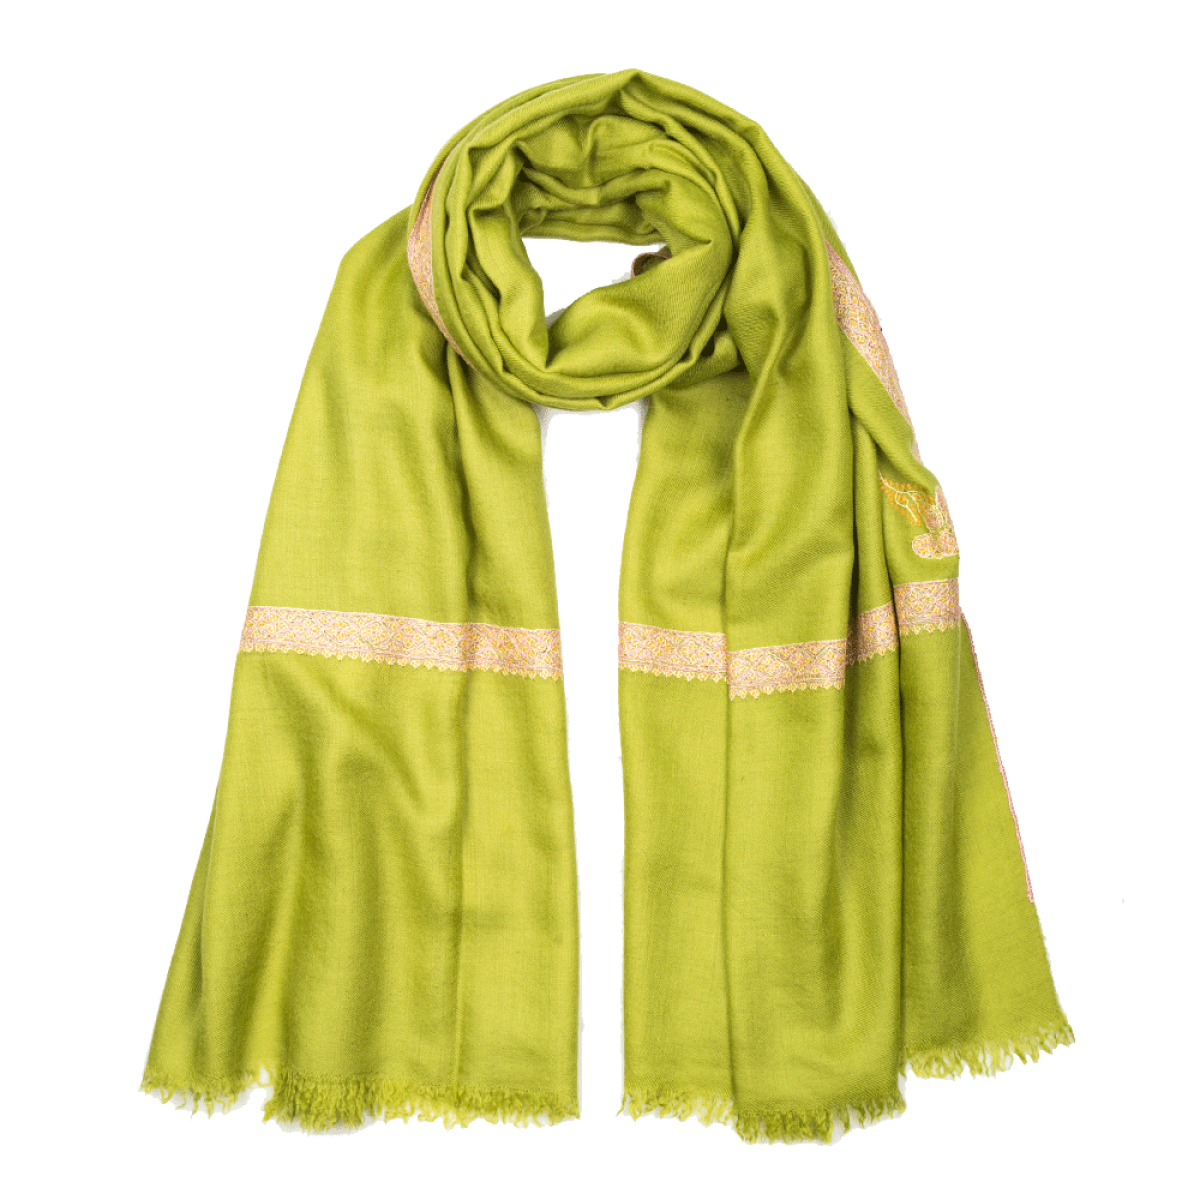 Embroidered Pashmina Stole - Bright Chartreuse Green & Pink